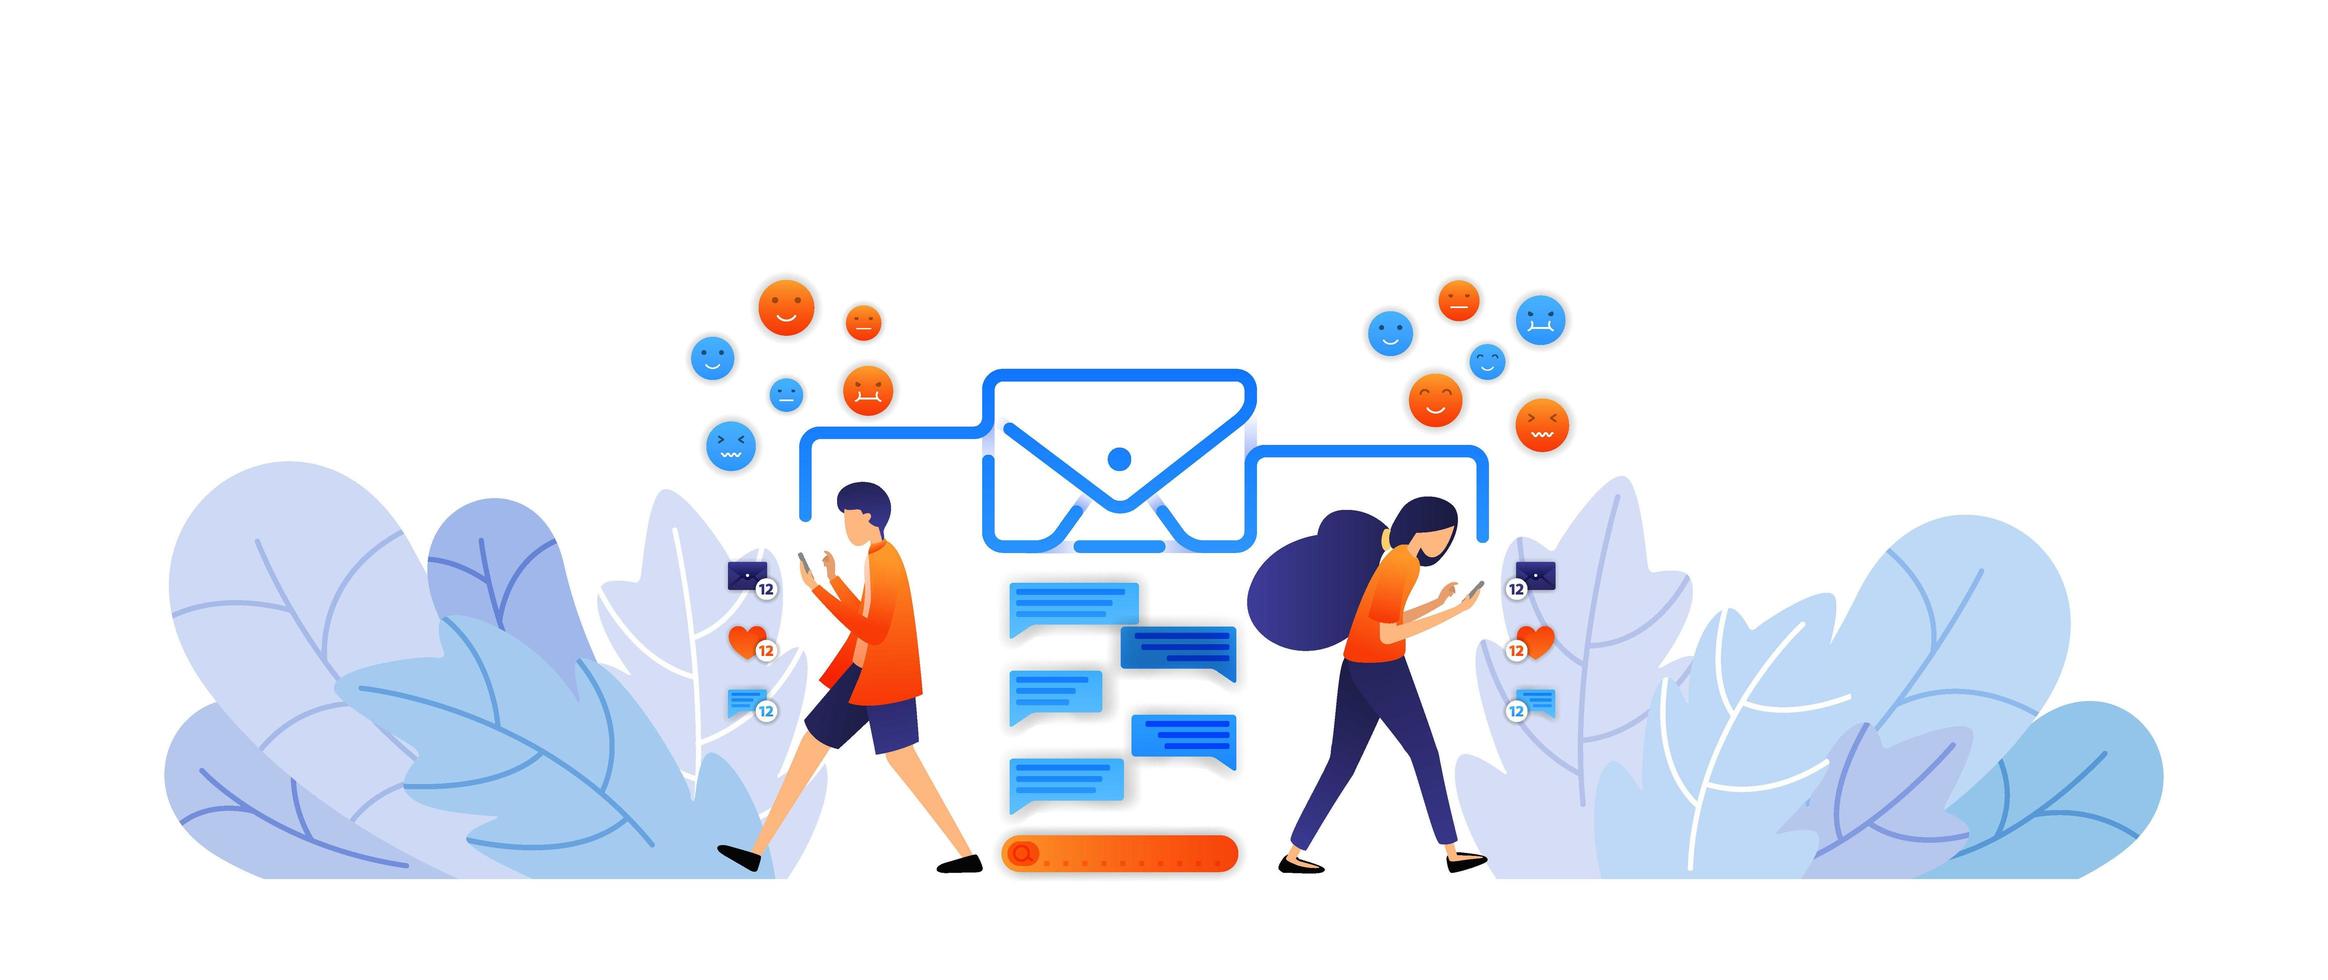 exchanging messages with social media. send digital messages and emoticons with envelopes. talk by typing vector illustration concept for landing page, web, ui, banner, poster, template, background